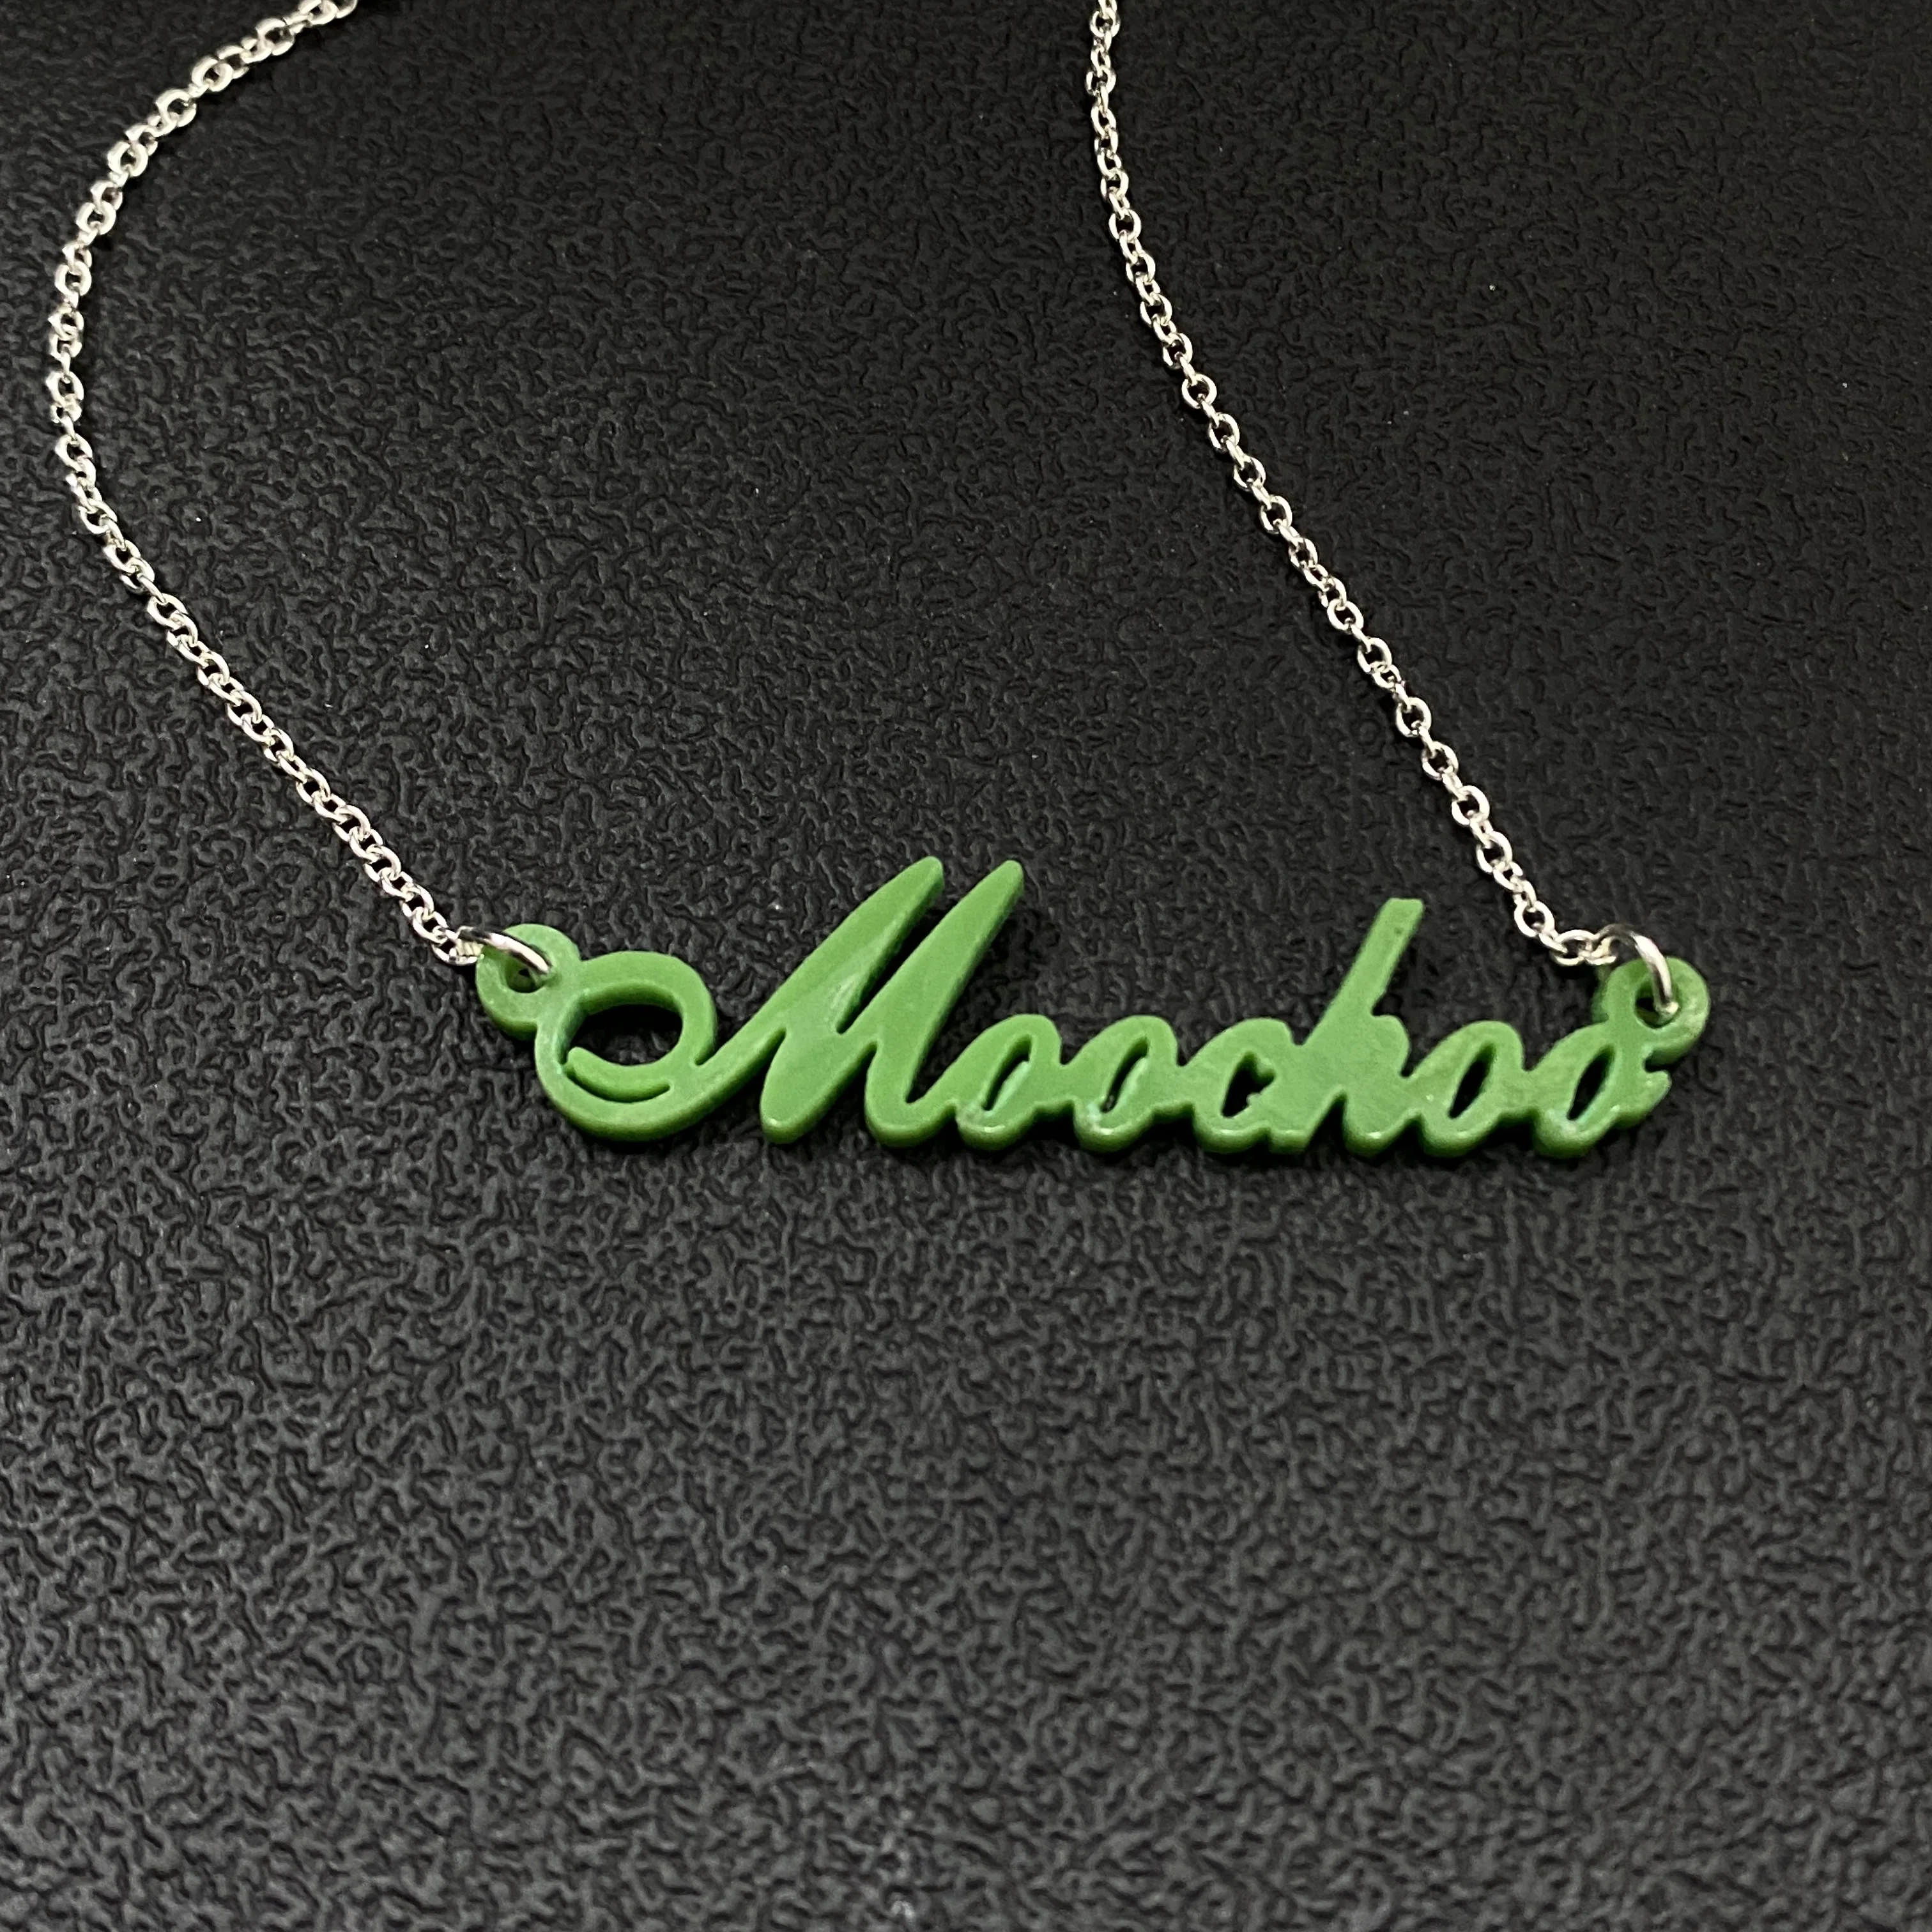 Personalized Custom Name Necklace Hip hop Customized Acrylic Pendant Necklace Fashion DIY Necklace Jewelry for Men Women Kids